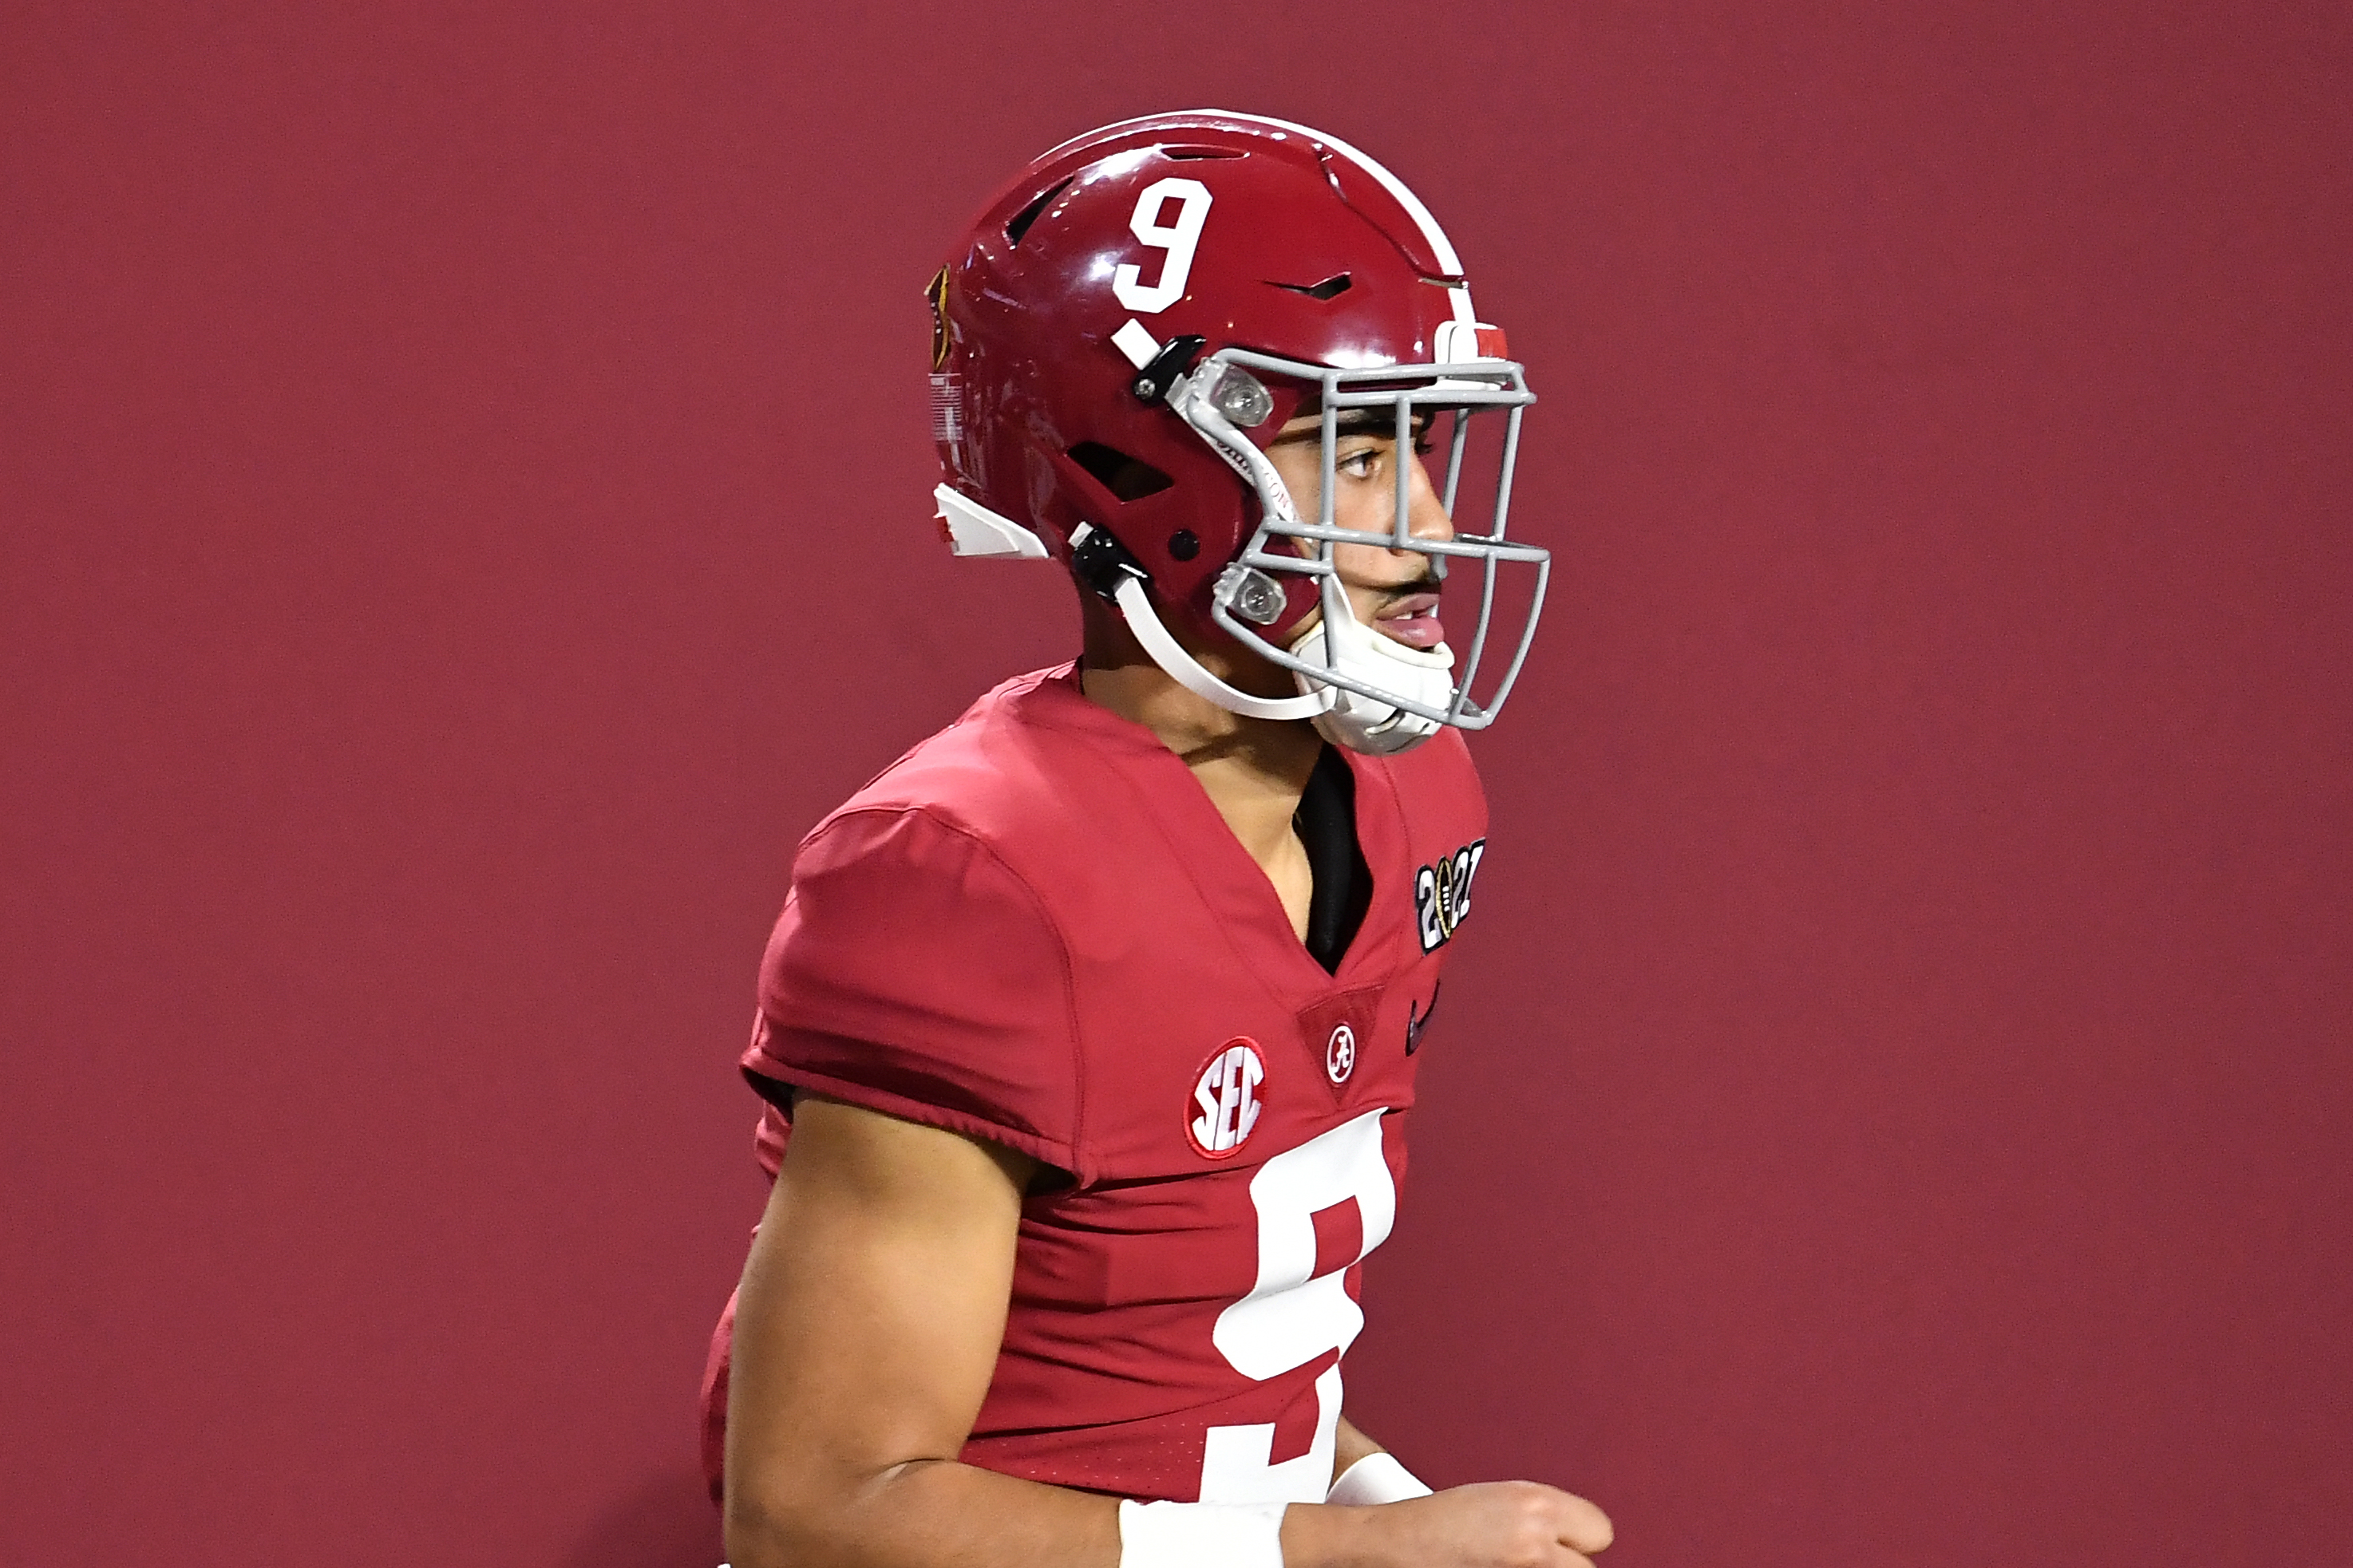 Alabama Spring Game 2021 Live stream, start time, TV channel, how to watch Bryce Young on A-Day